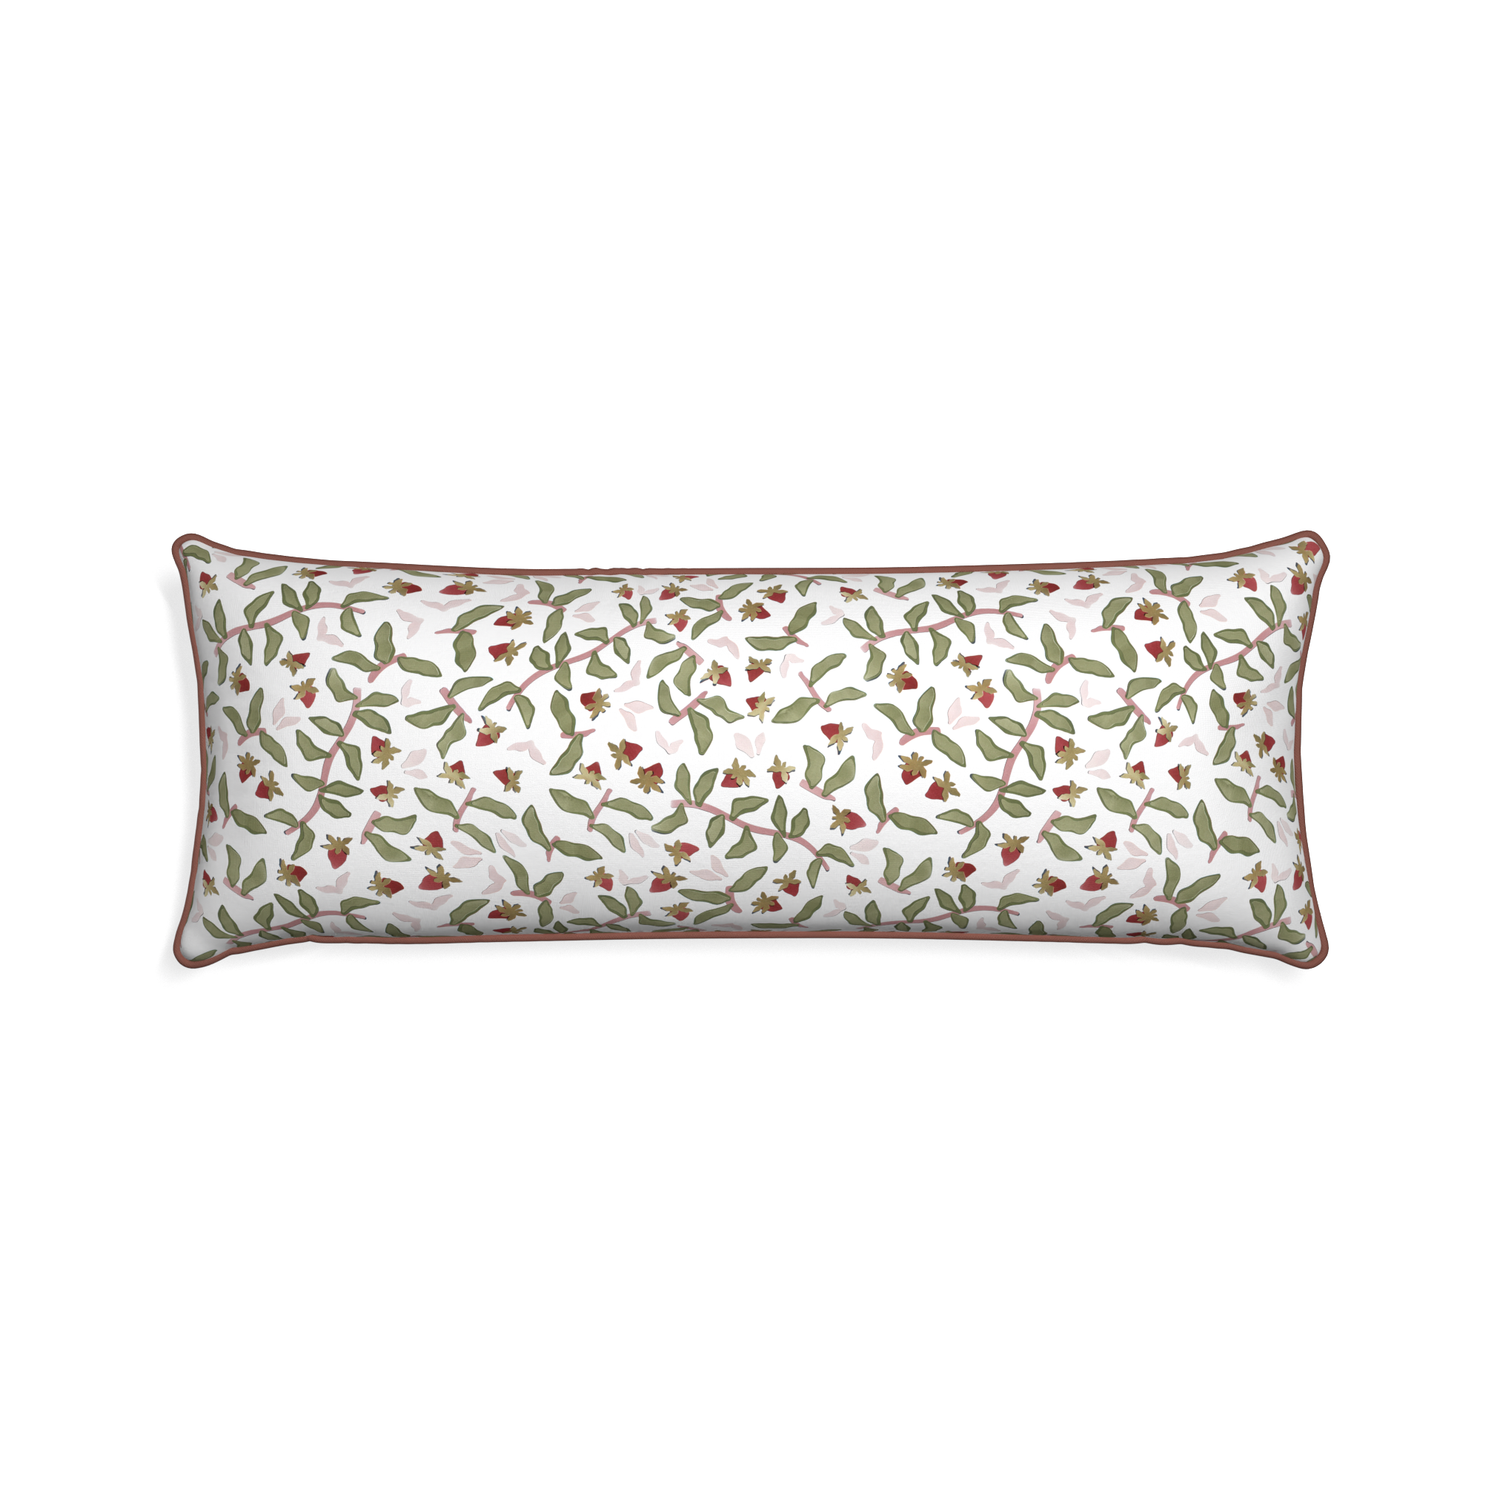 Xl-lumbar nellie custom pillow with w piping on white background